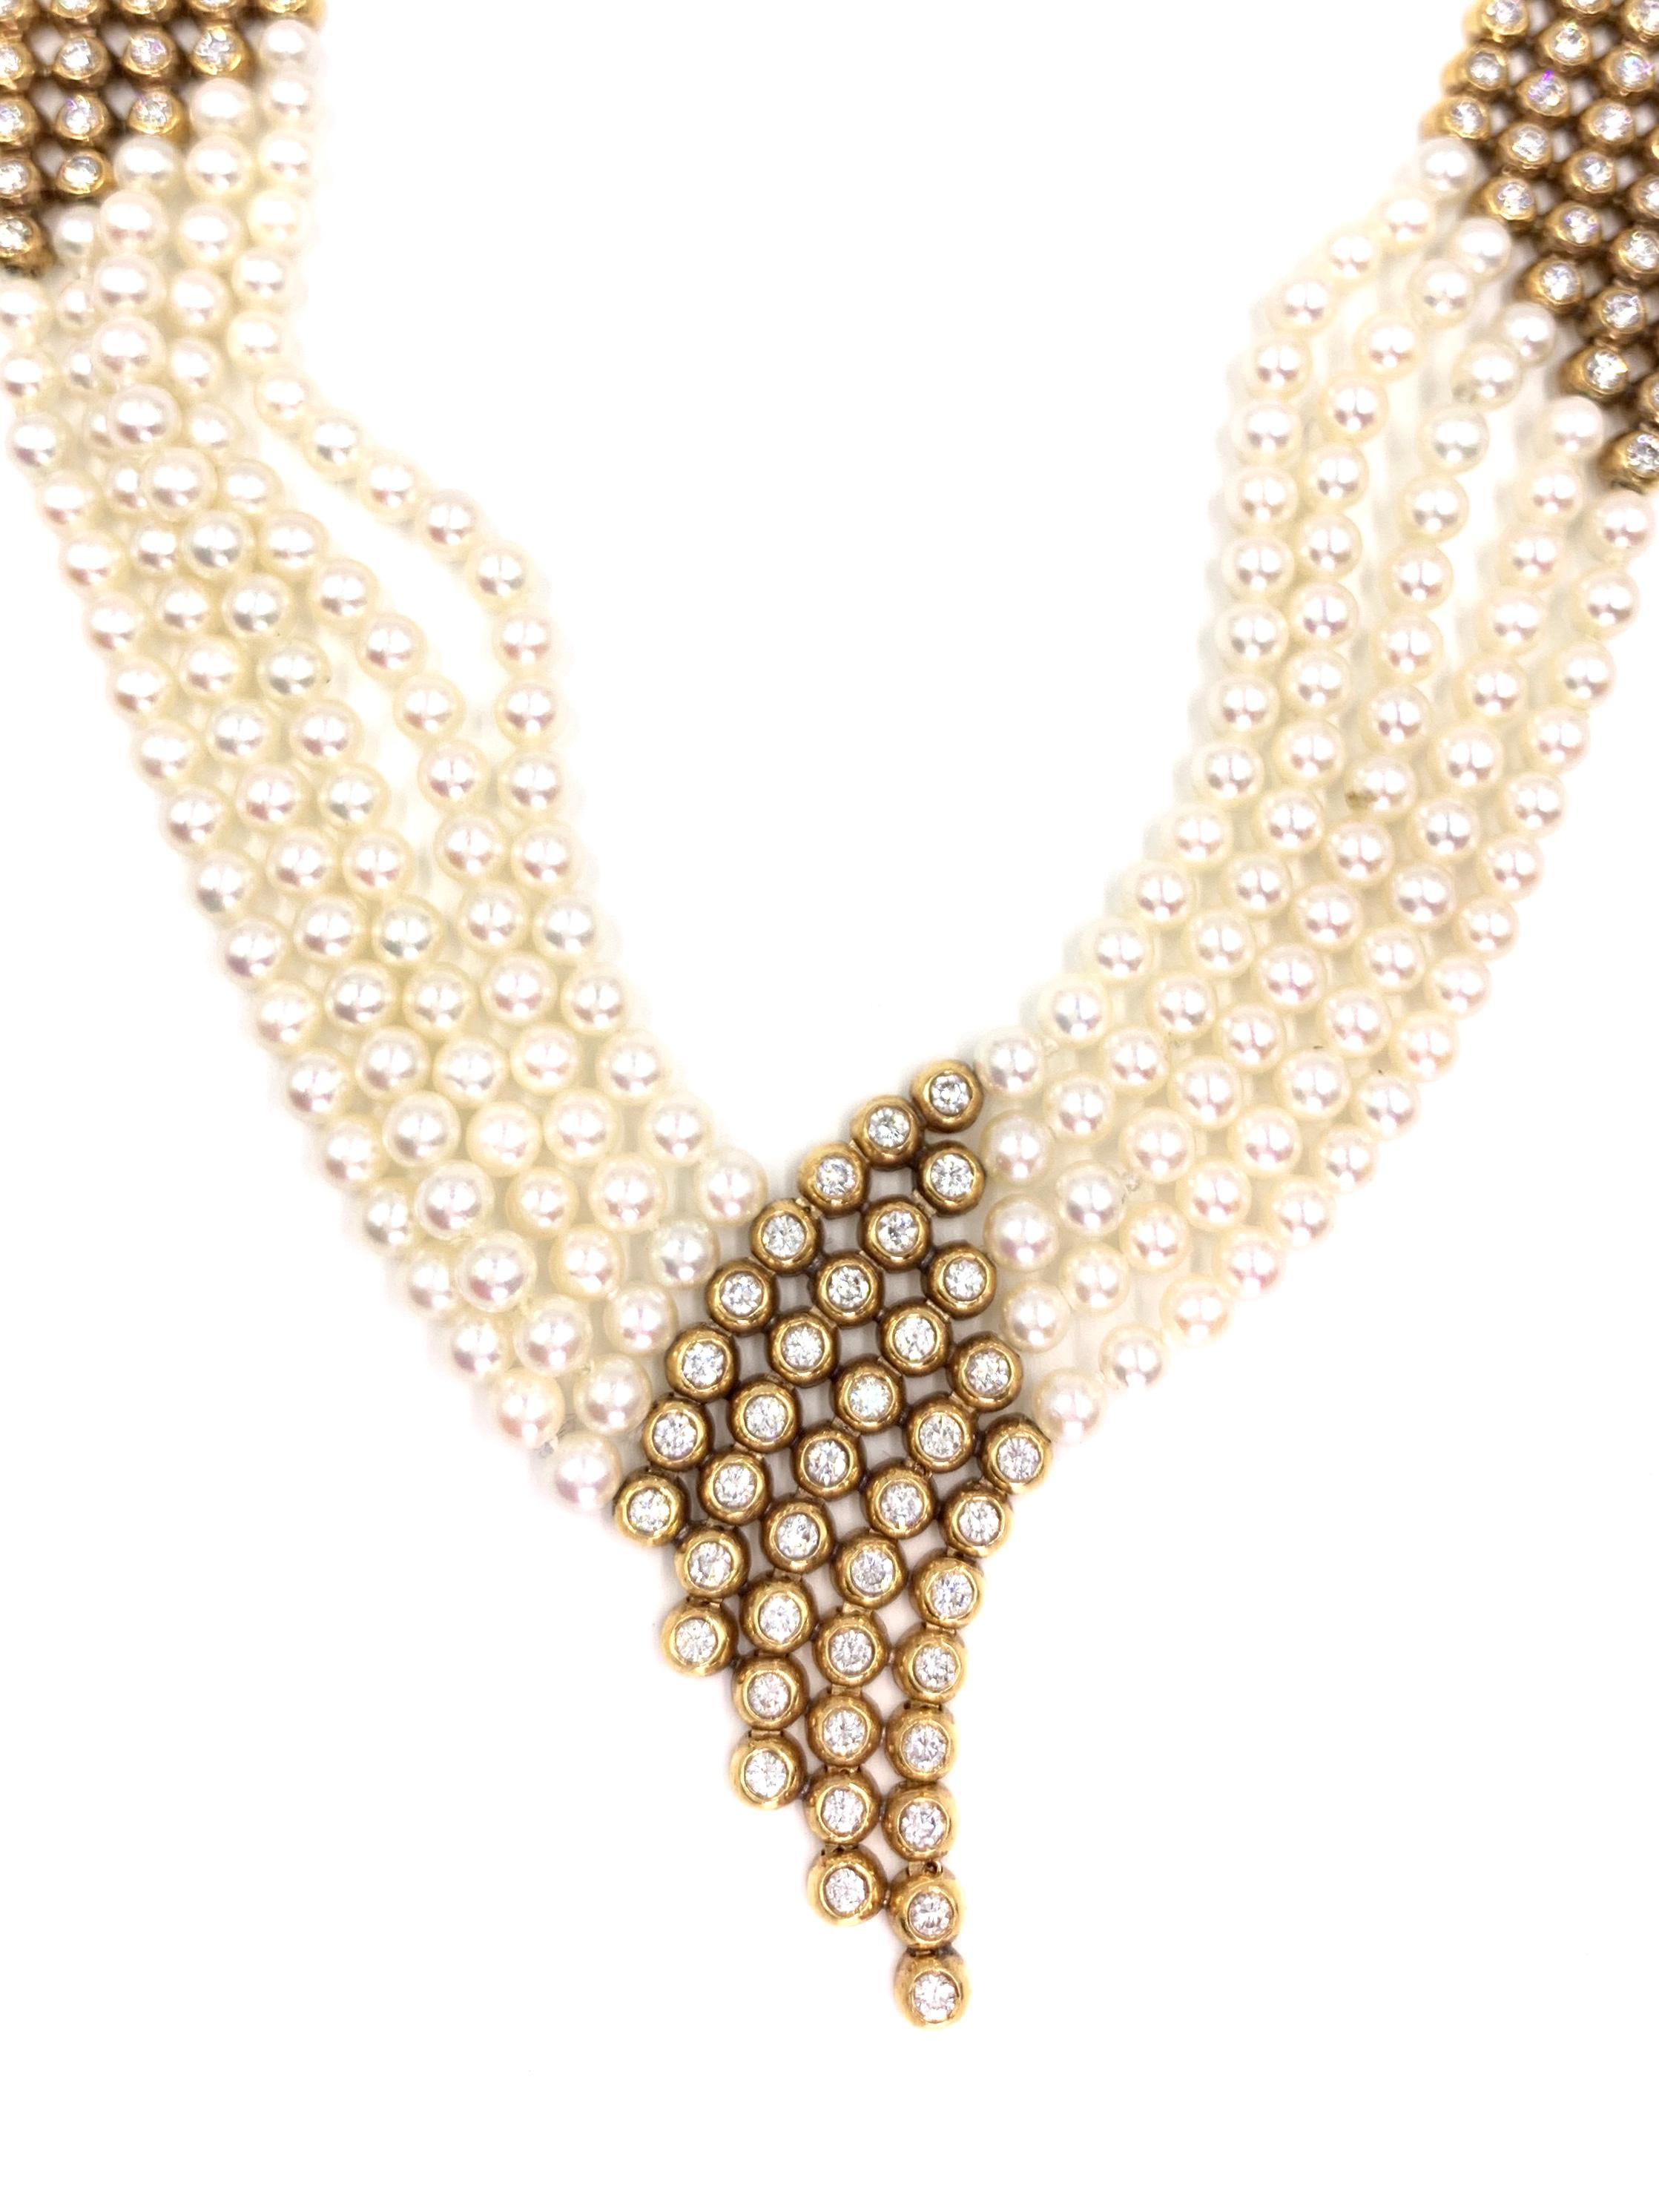 An exquisite necklace with modern appeal yet a not-so-subtle nod to fabulous Gatsby era jewelry. This five strand piece is designed to lay beautifully and comfortably on the neck with a feminine curved V drop in the center. Each strand is composed